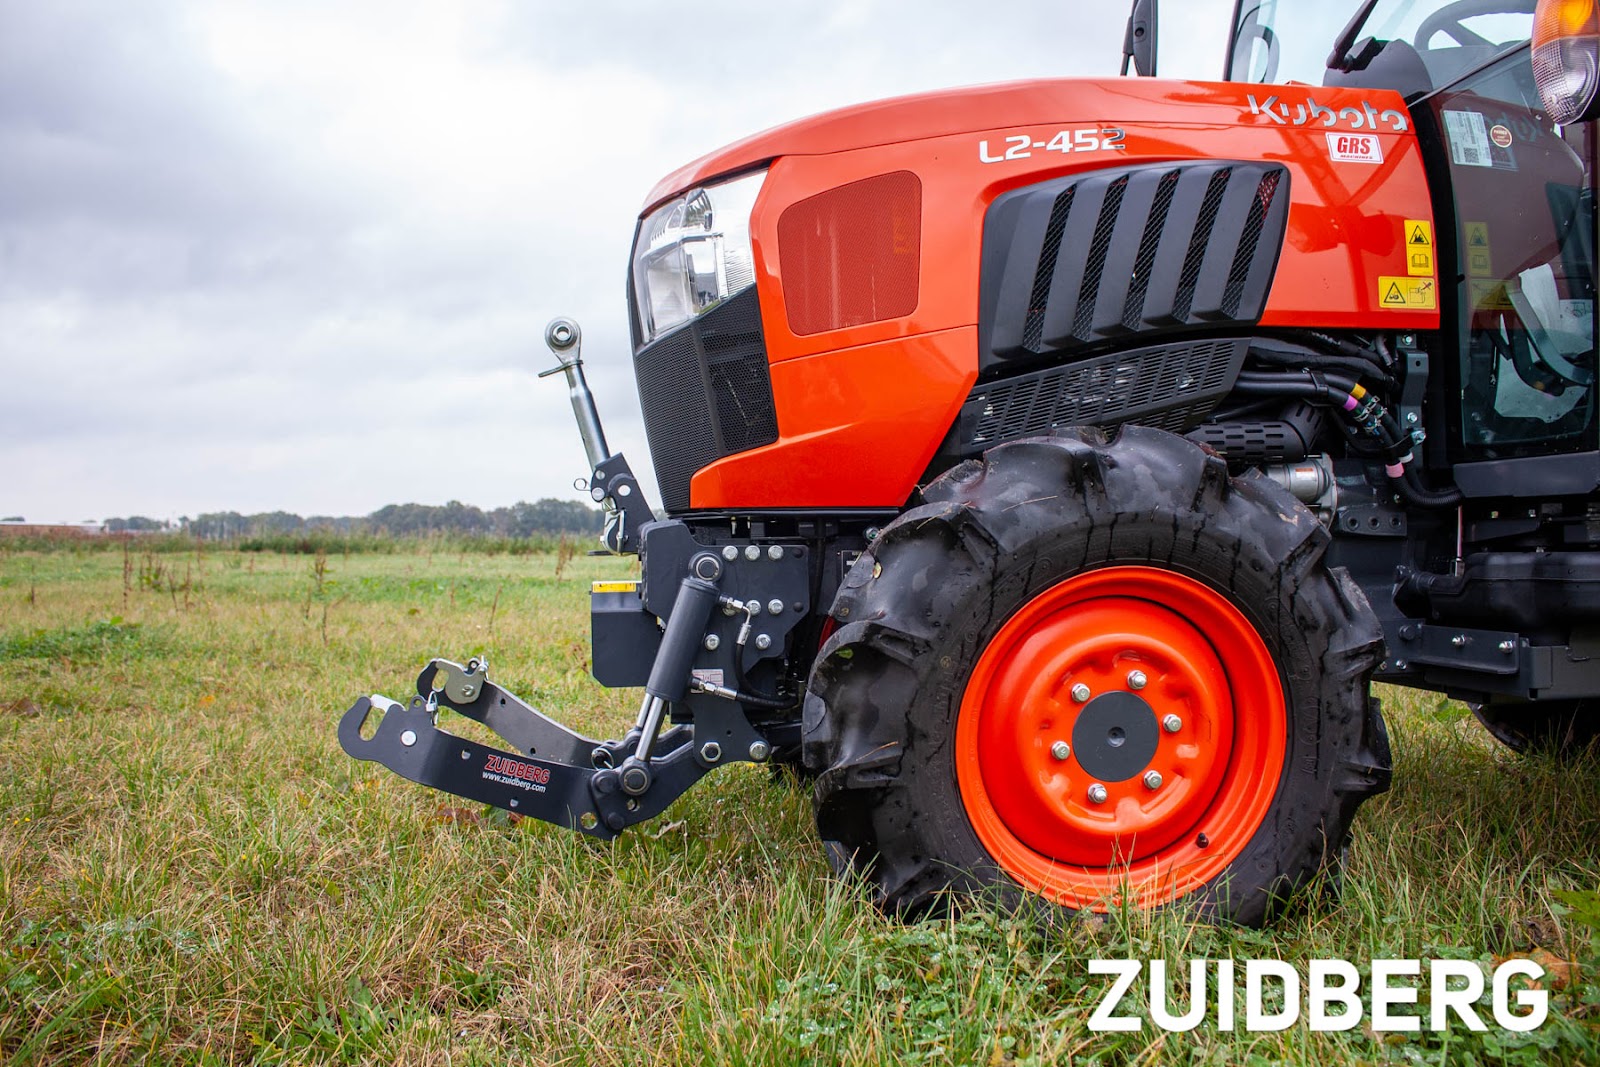 New Front Linkage & PTO Available for Kubota L2 -Serie